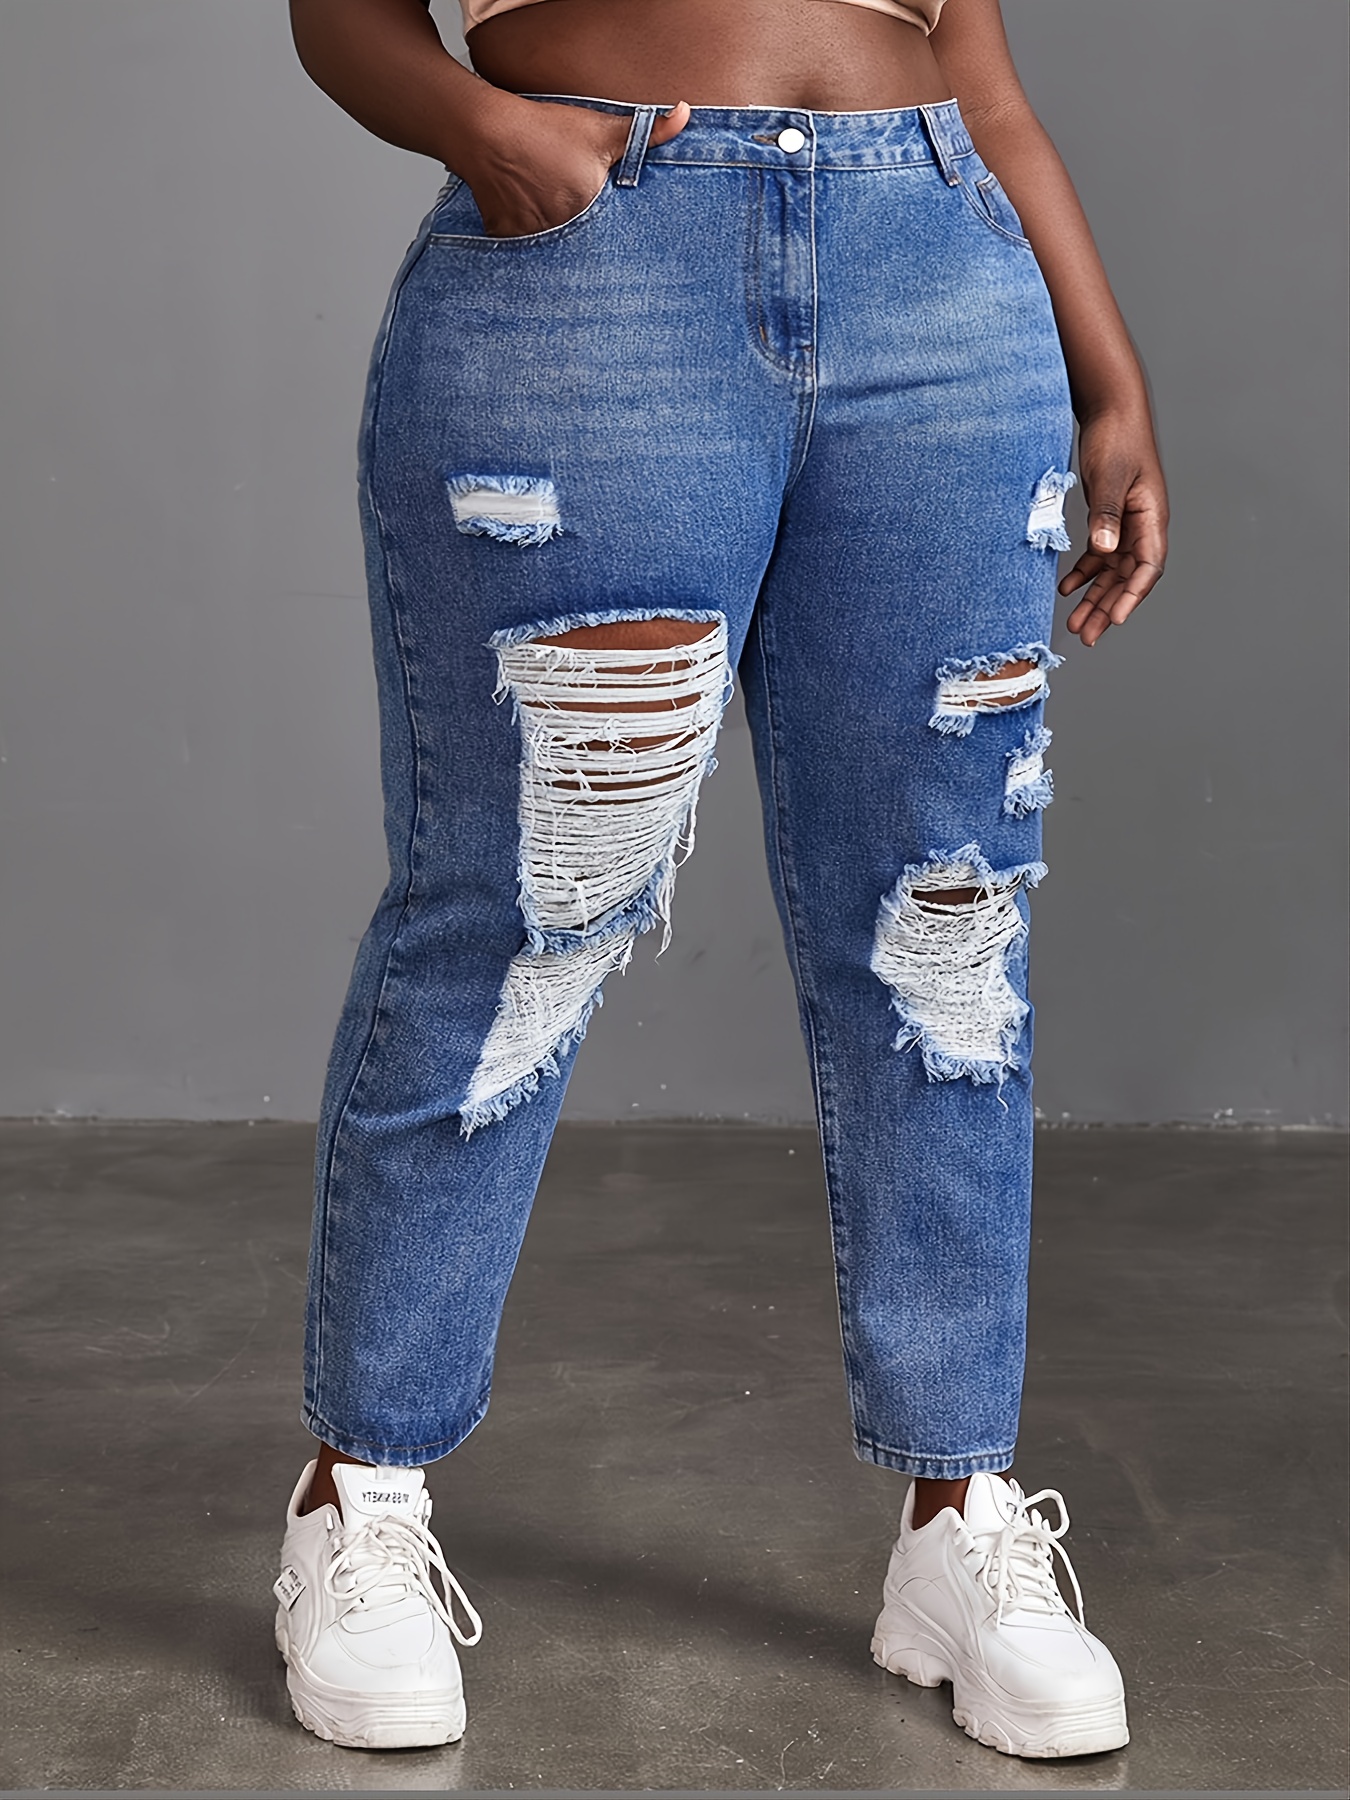 Ripped Jeans For Women and Juniors  Distressed Plus Jeans – MomMe and More